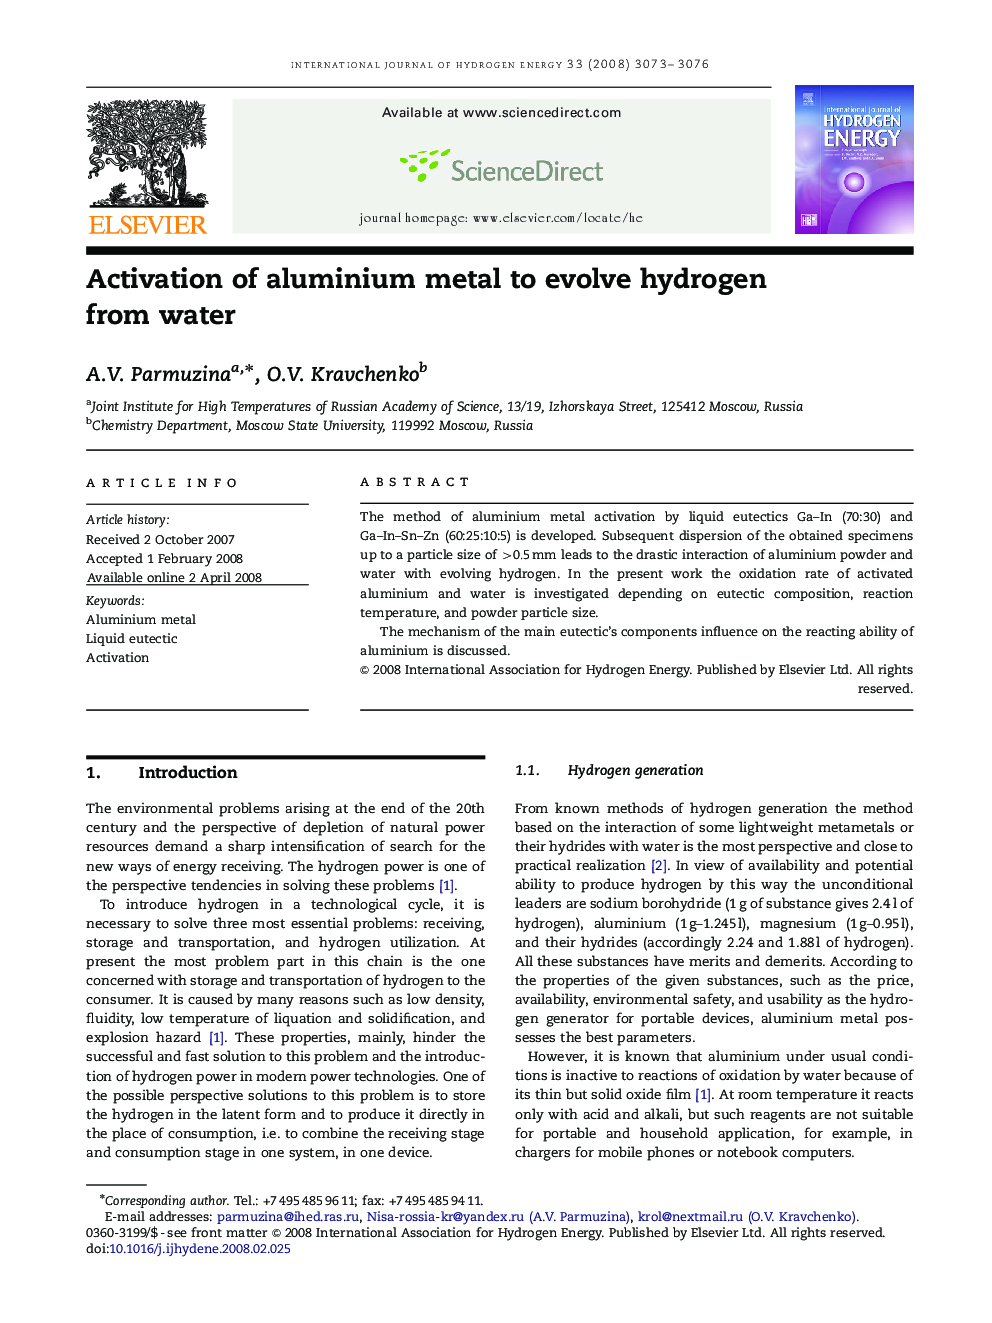 Activation of aluminium metal to evolve hydrogen from water